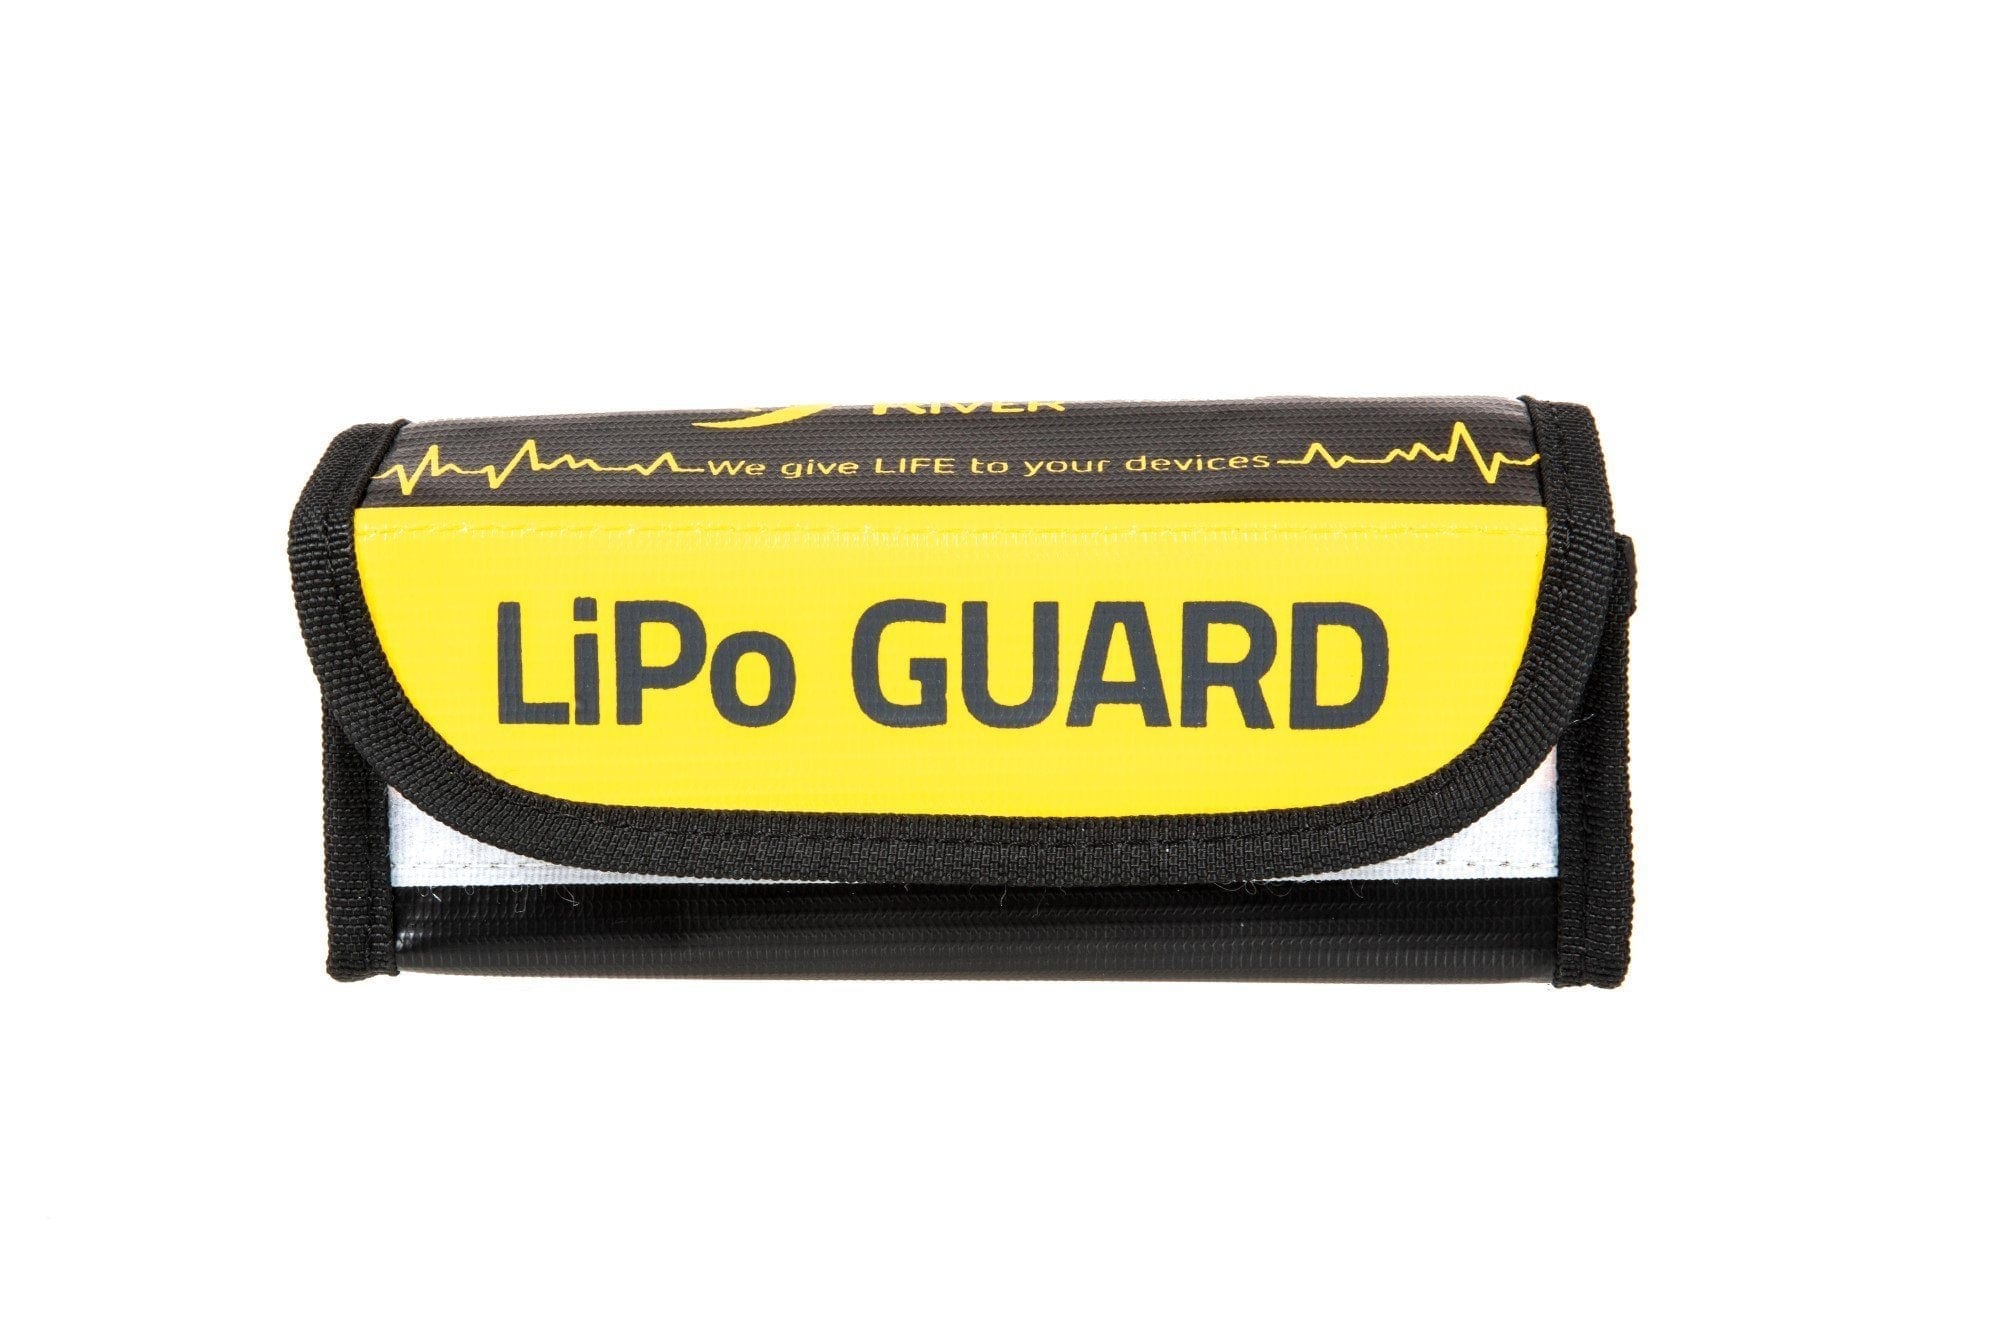 Protective bag for Li-Po batteries by Electro River on Airsoft Mania Europe